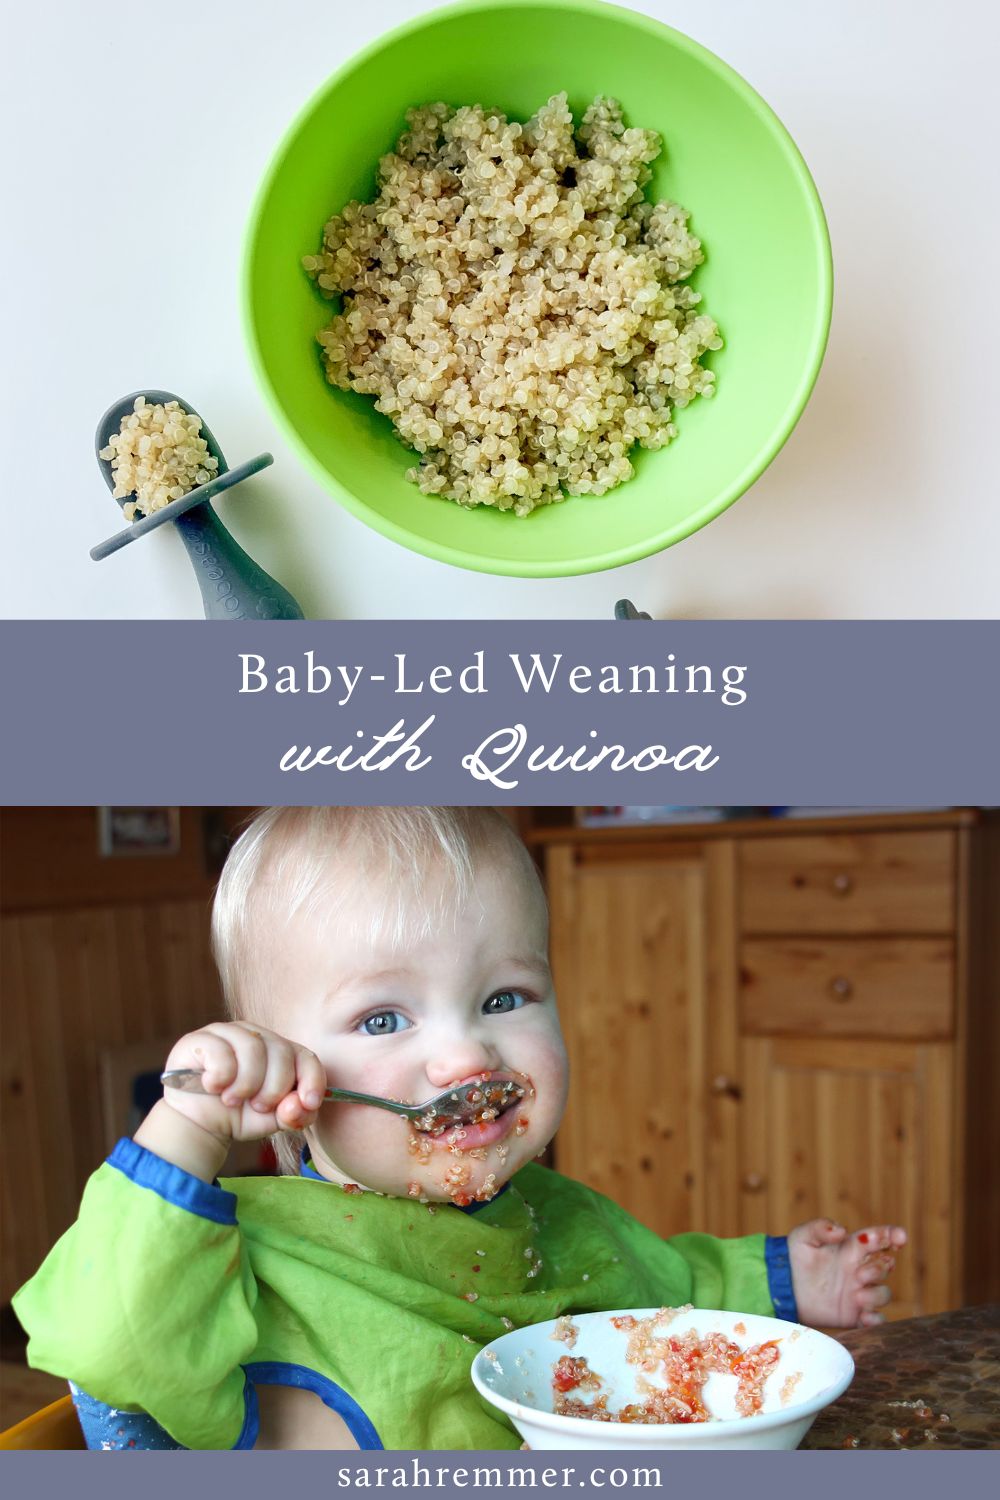 Here is everything you need to know about baby-led weaning with quinoa, from a registered dietitian. Here's how to introduce quinoa to your baby.